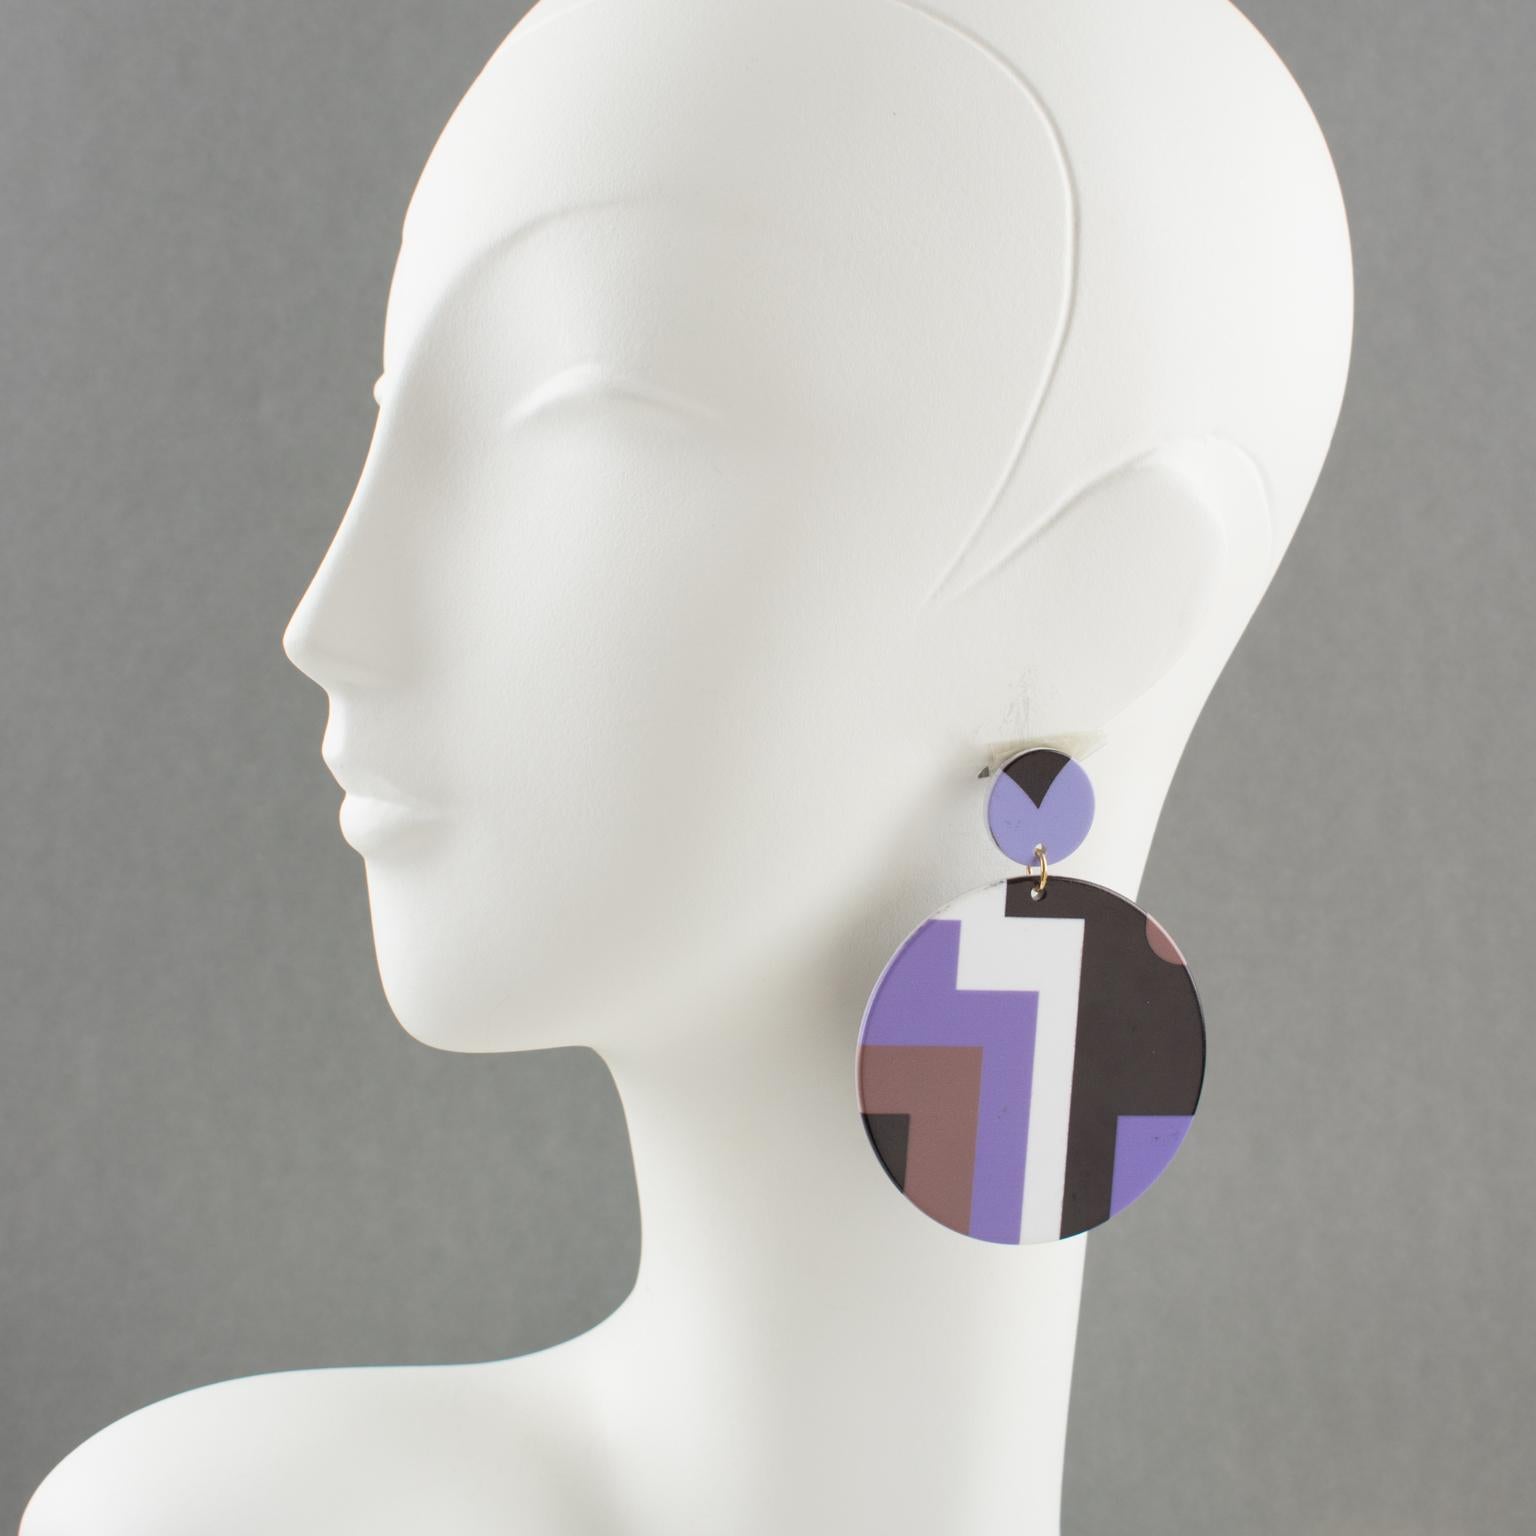 Lovely French oversized resin pierced earrings. Large dangling round flat disc shape with Art-Deco-inspired pattern in assorted colors of purple, taupe, black, and white. For pierced ears. No visible maker's mark.
Measurements: 3.19 in. long (8 cm)